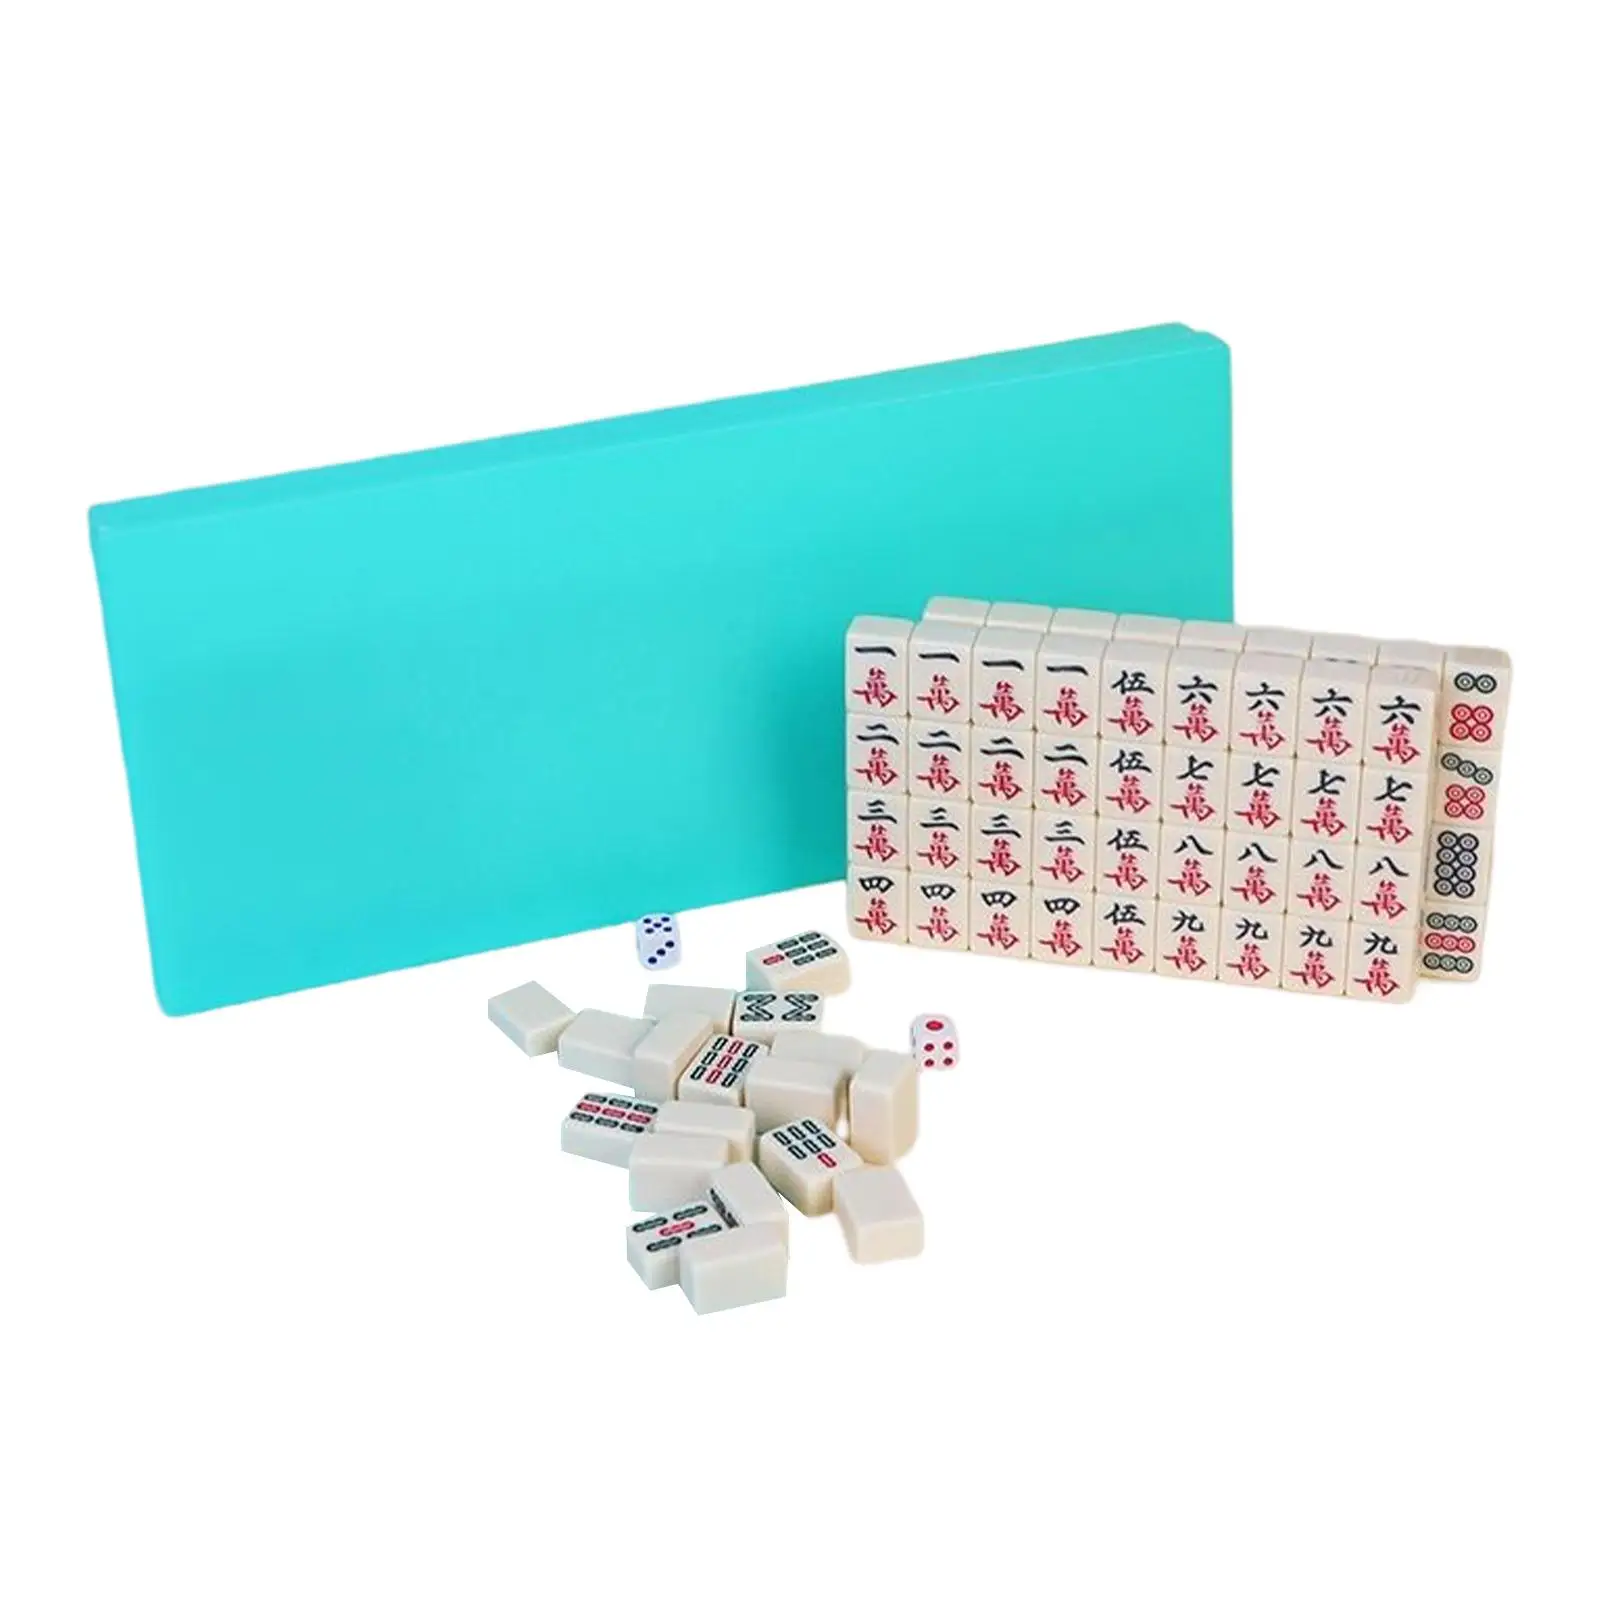 Portable Chinese Mini Mahjong Game Set Table Game Activity Game for Travel